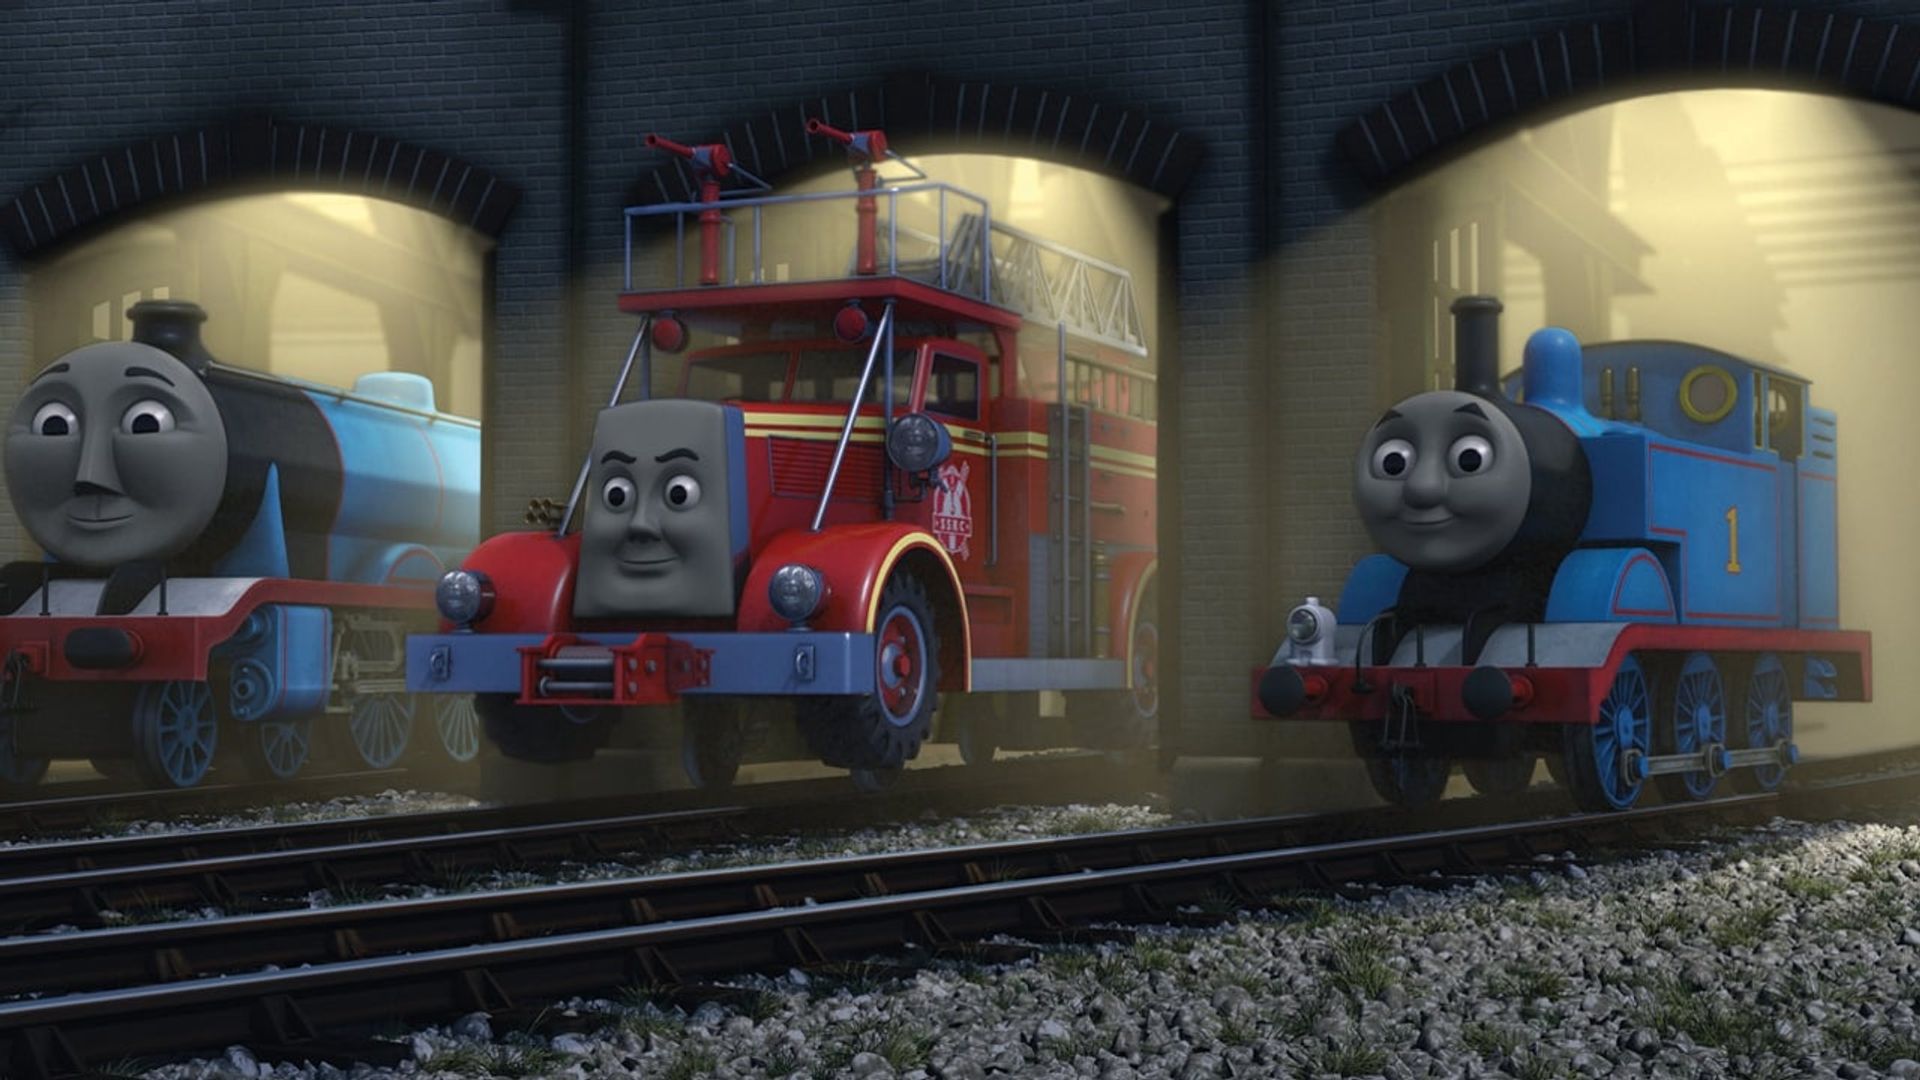 Thomas & Friends: Day of the Diesels Backdrop